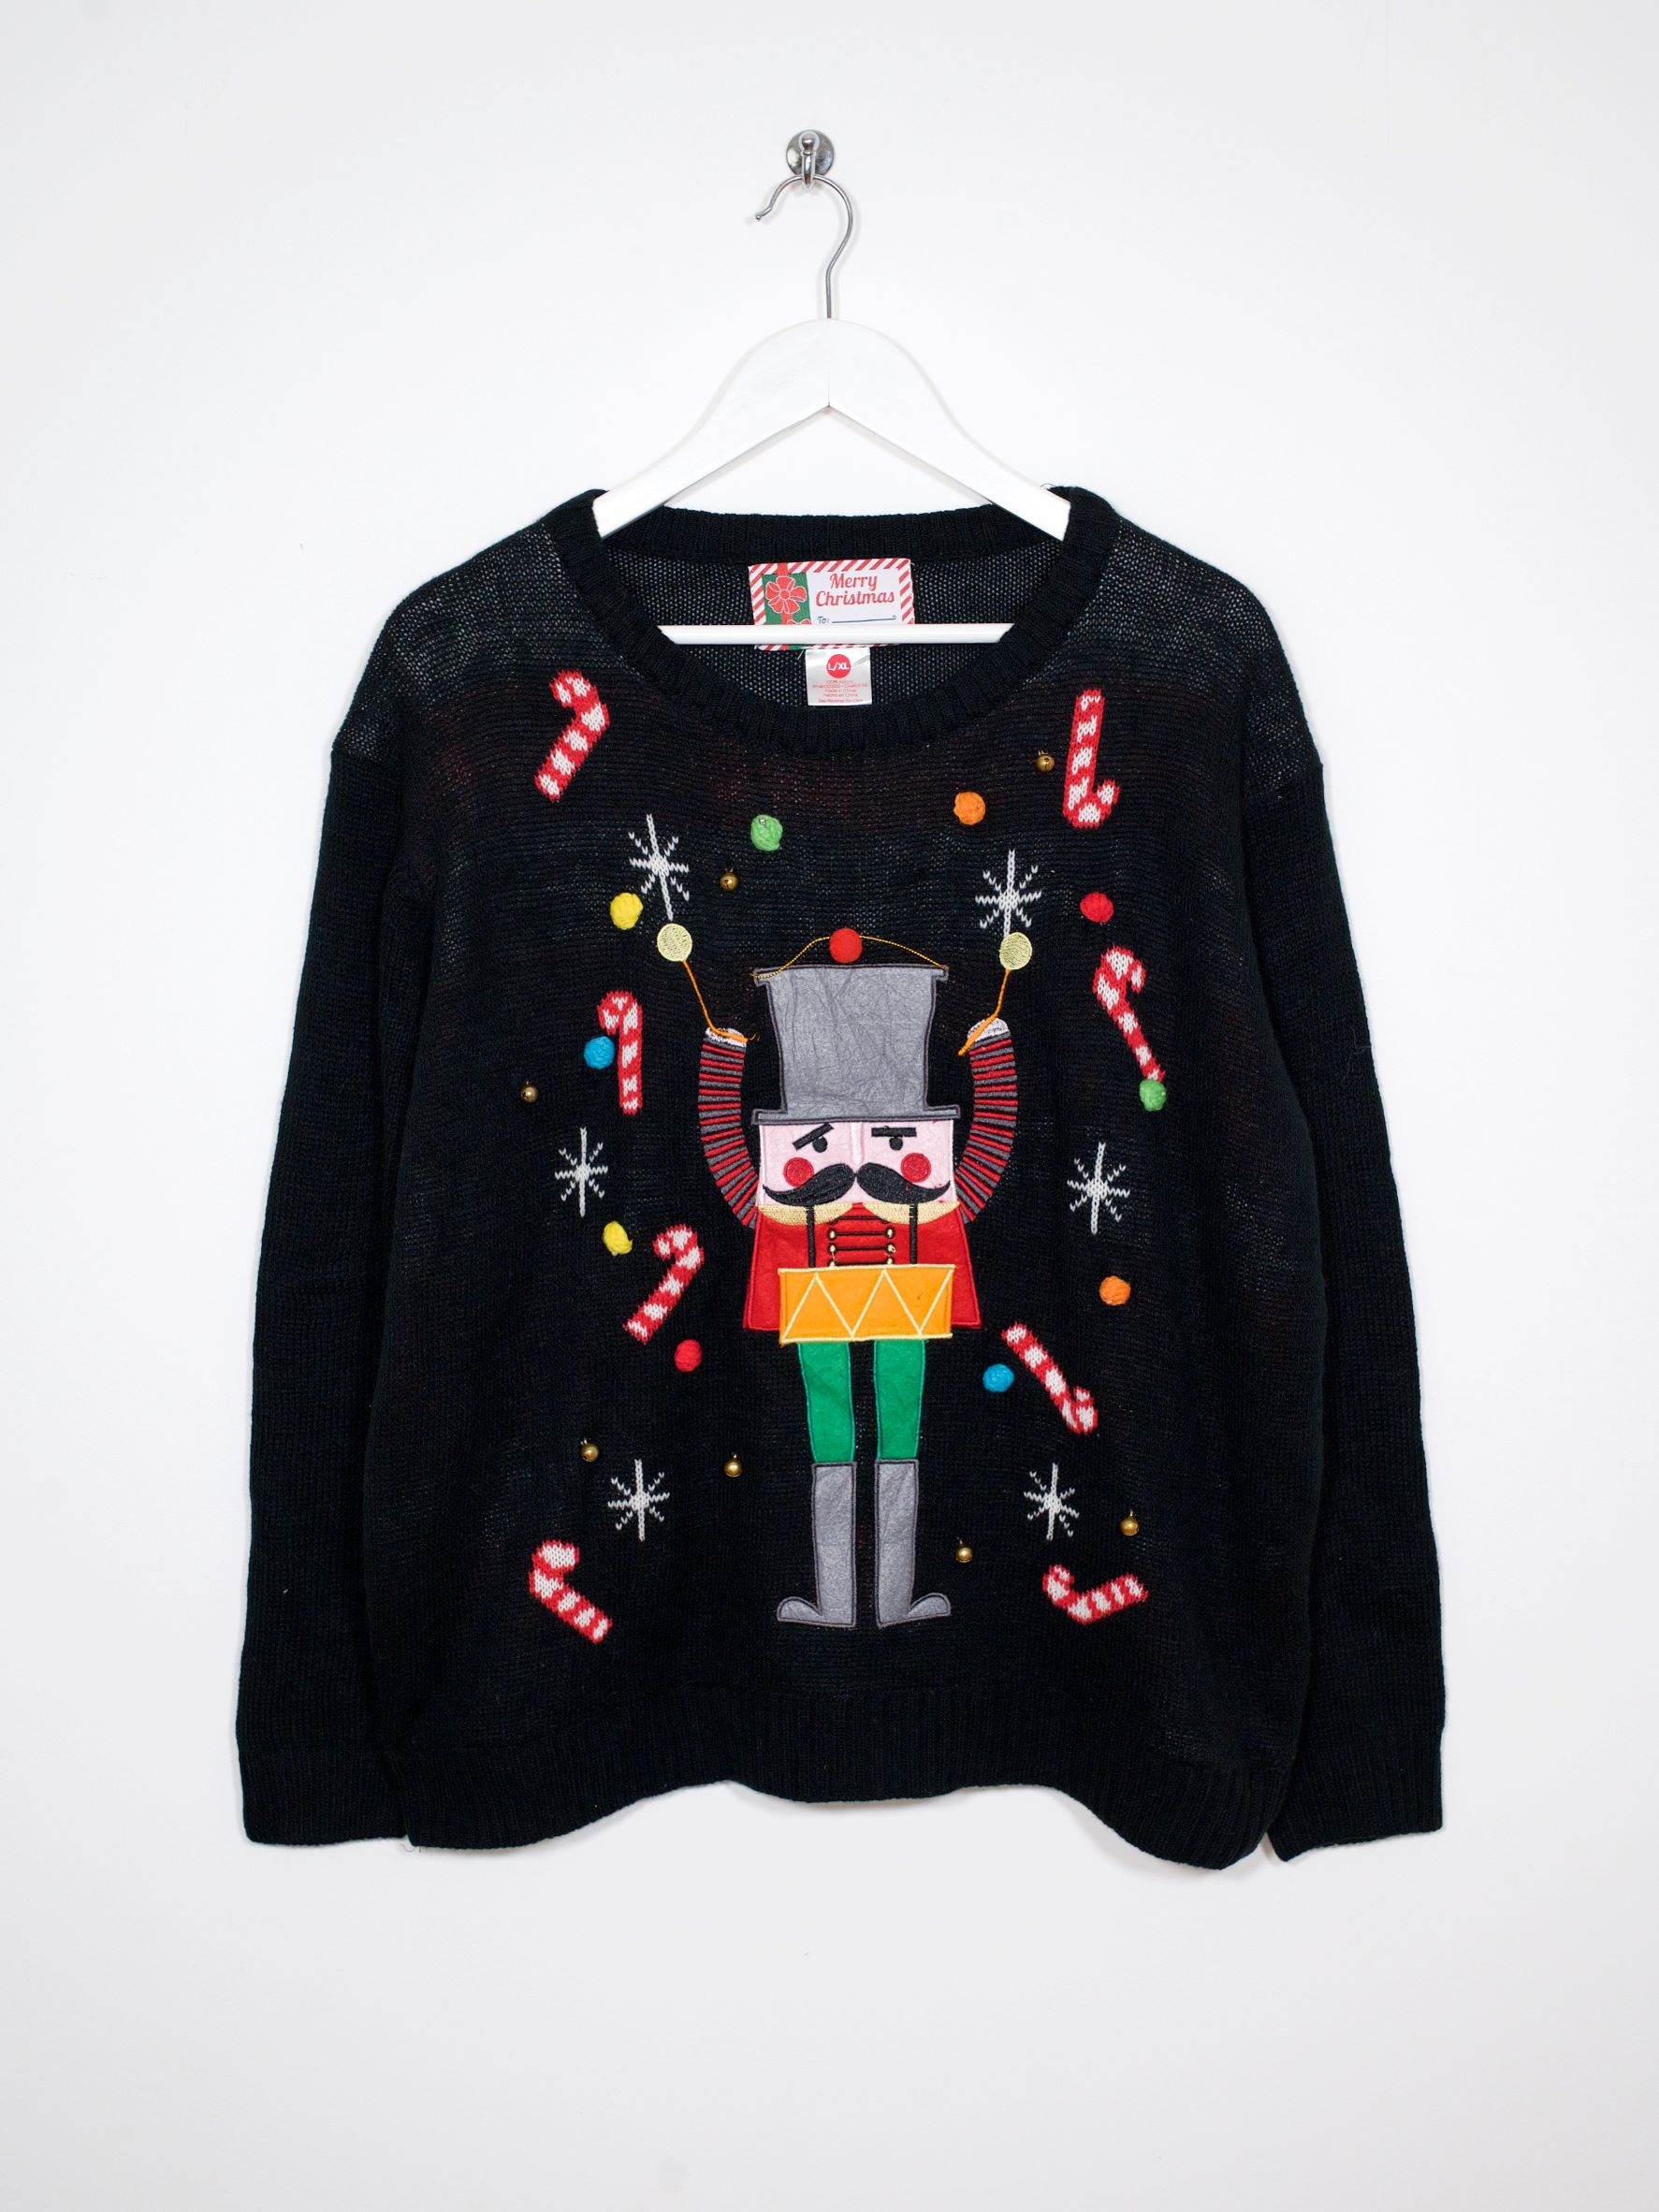 Toy Soldier Christmas Jumper